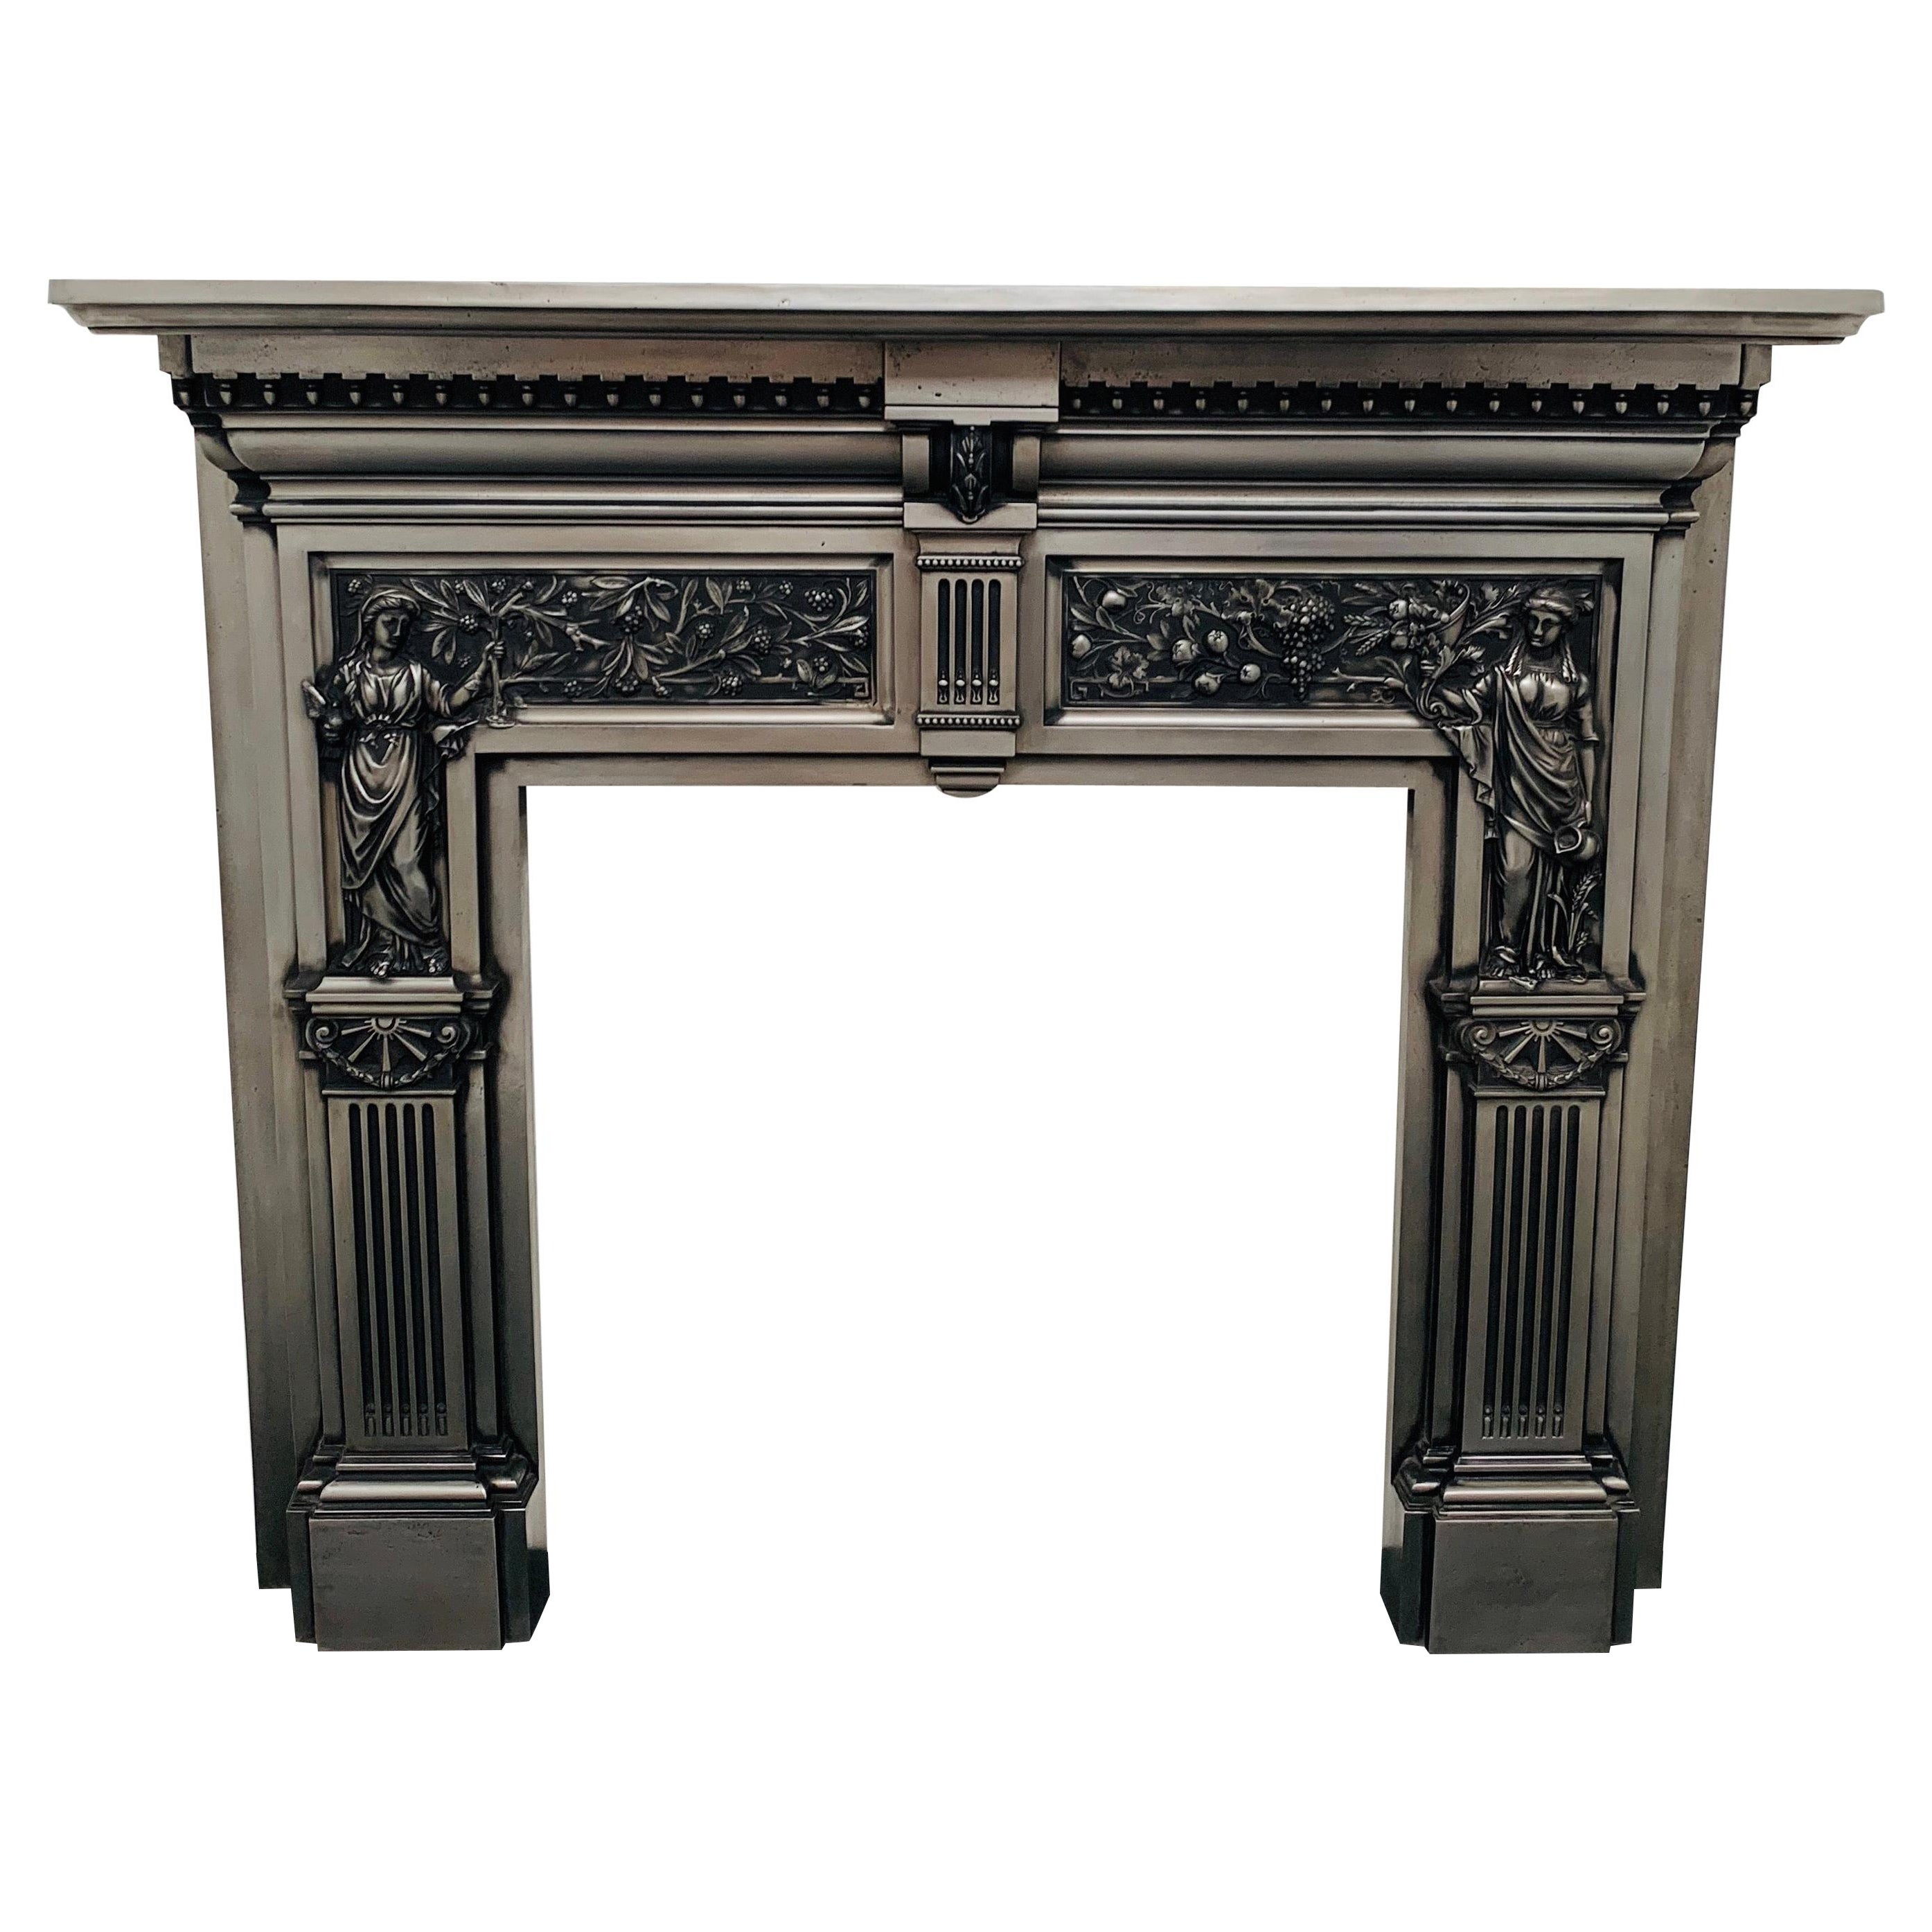 19th Century Burnished Cast Iron Fireplace Mantlepiece For Sale